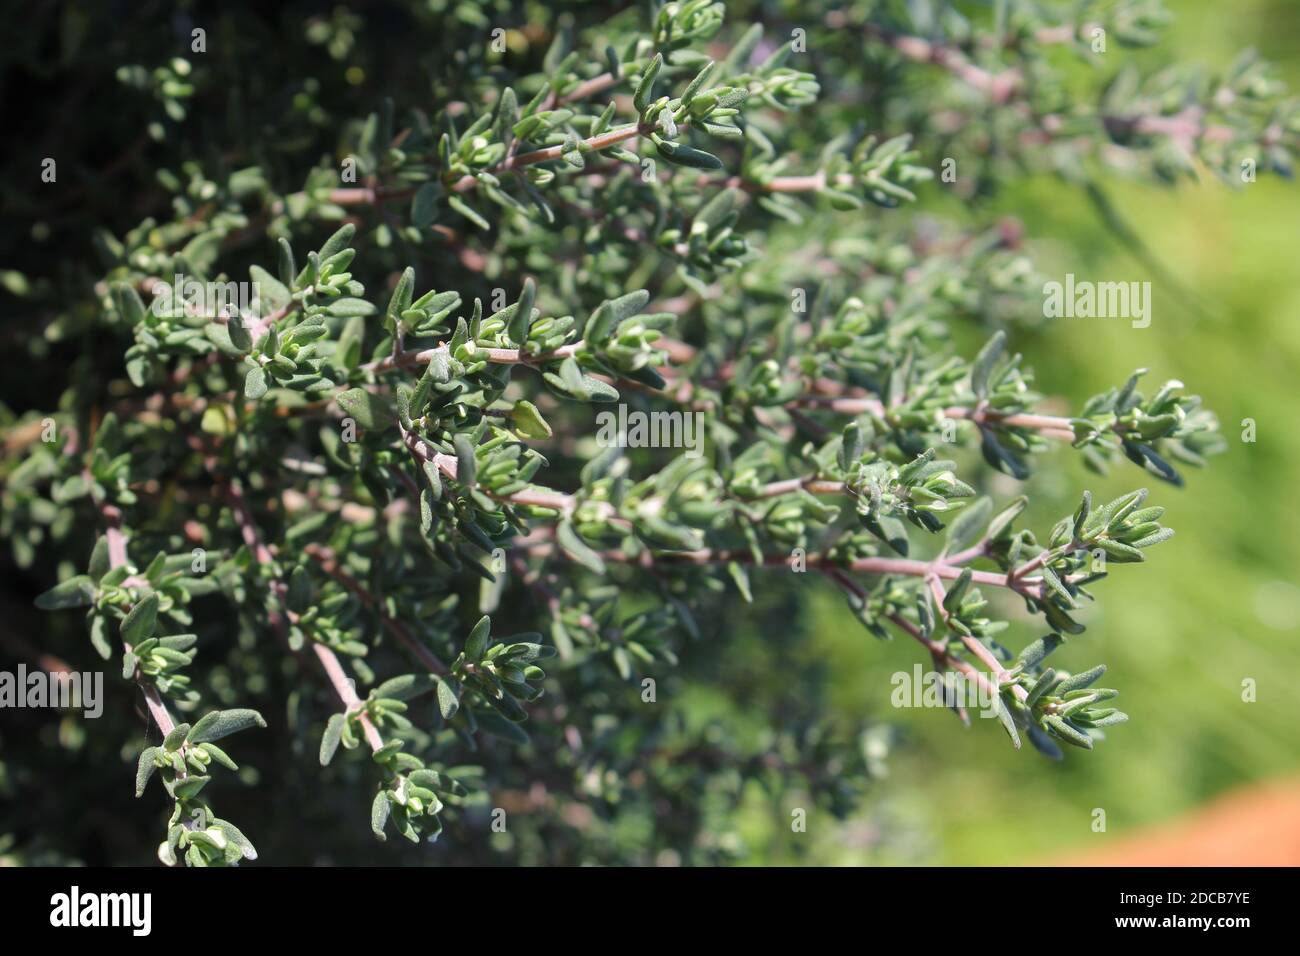 Thyme growing in the garden Stock Photo